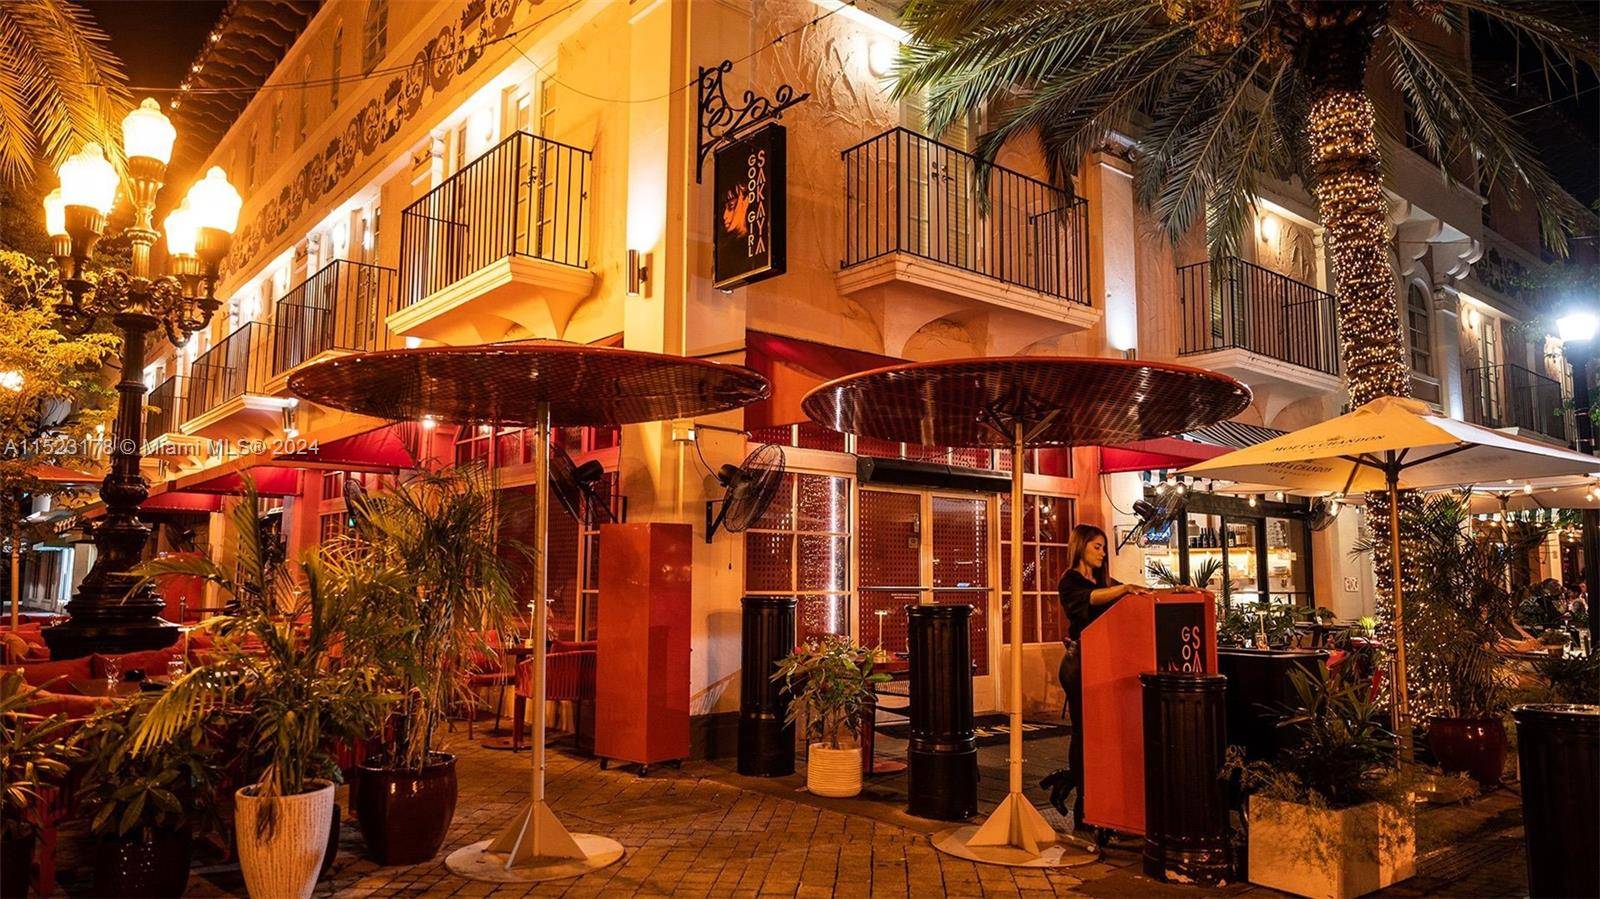 Uncover the potential of this remarkable 2nd generation restaurant opportunity in vibrant Espanola Way.